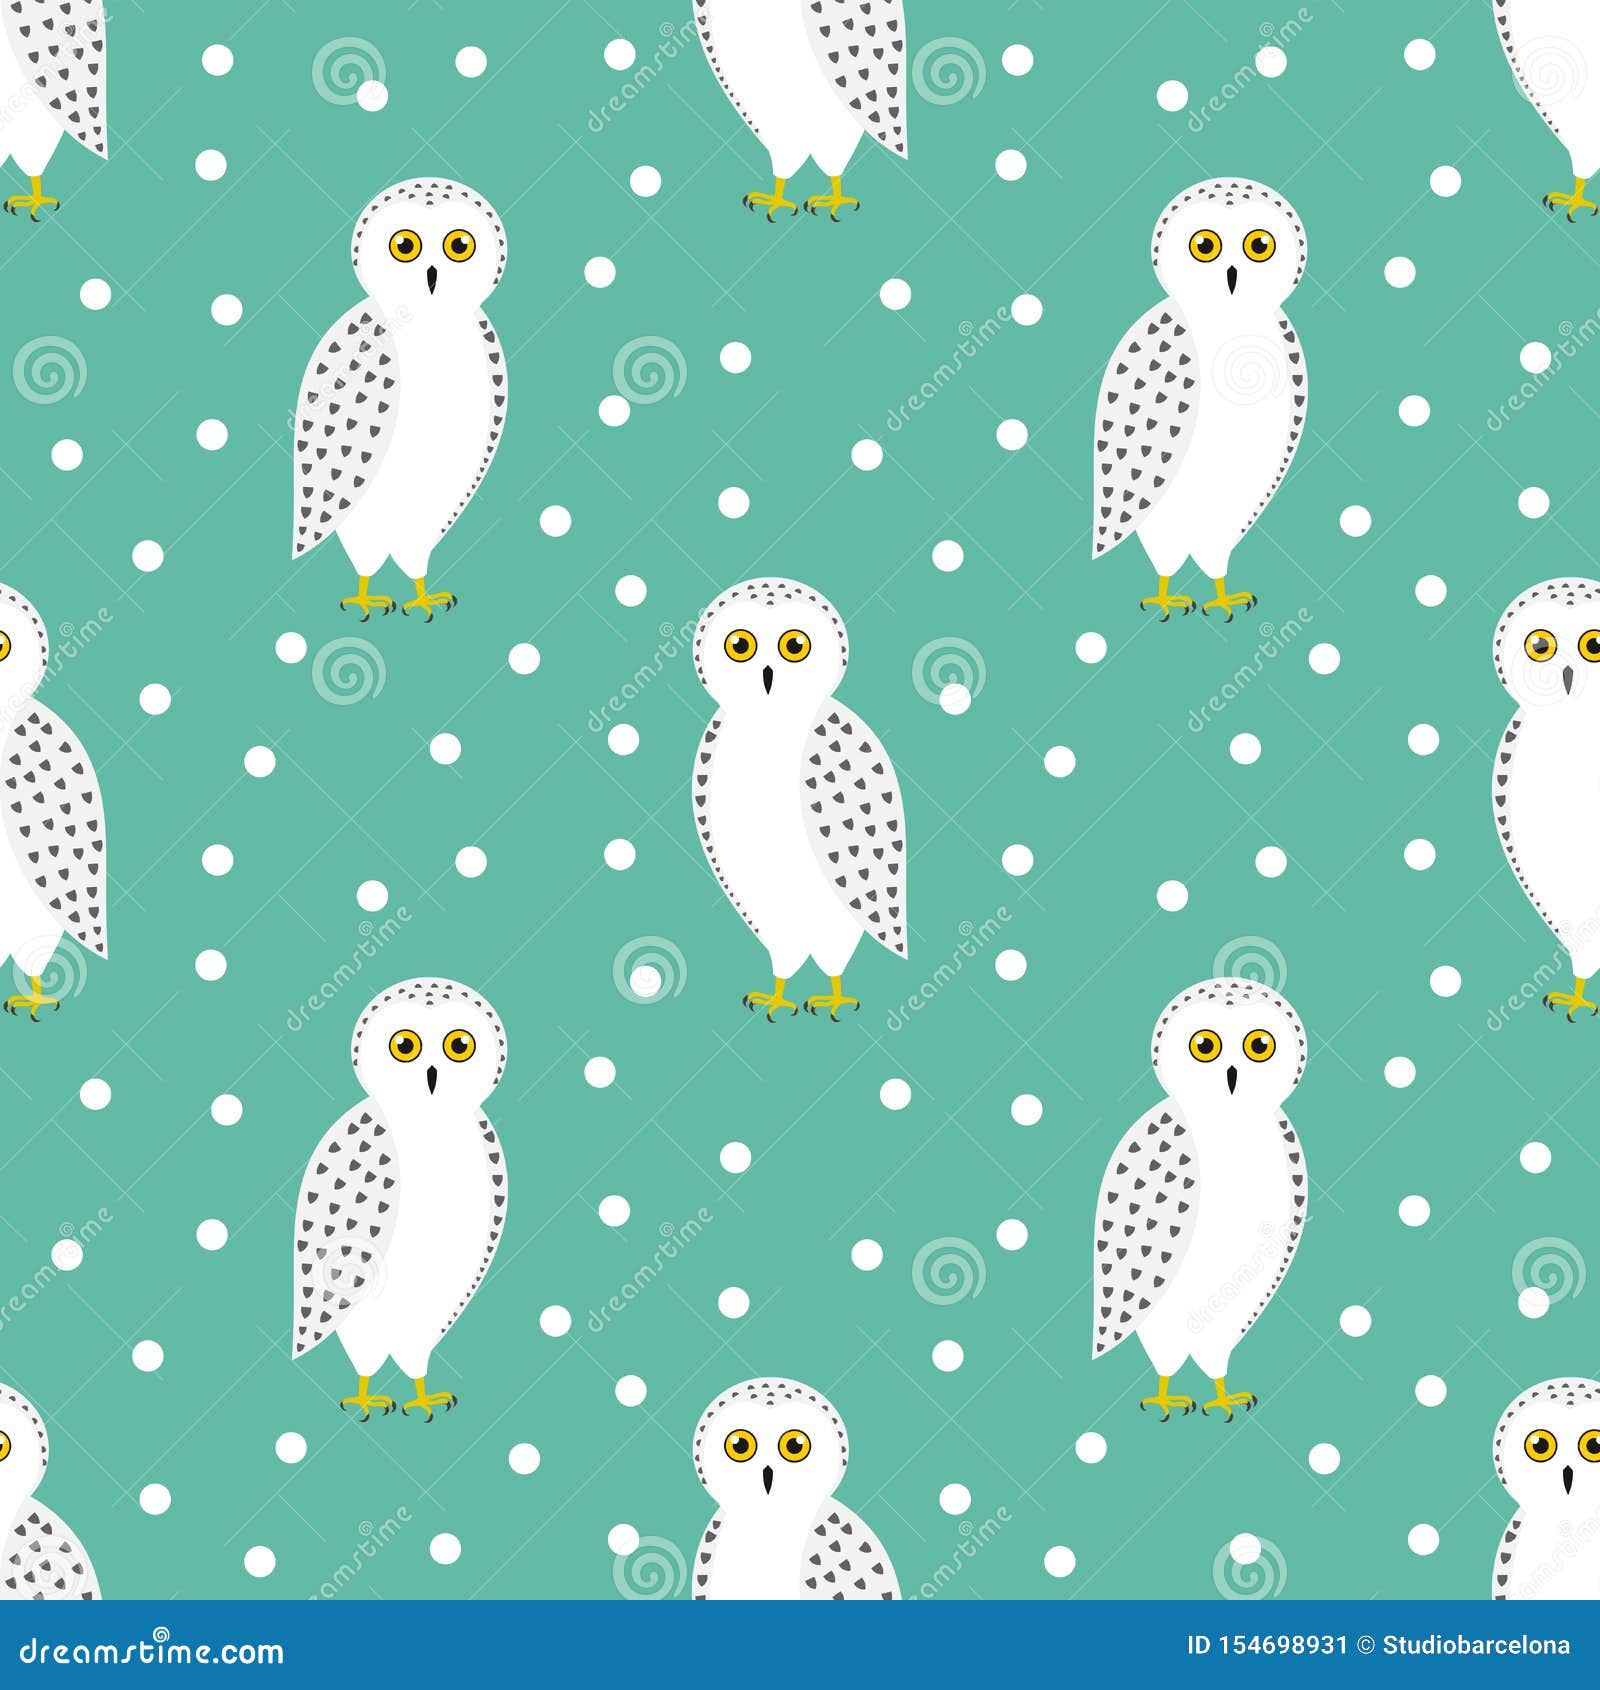 the-snowy-owl-seamless-winter-pattern-stock-vector-illustration-of